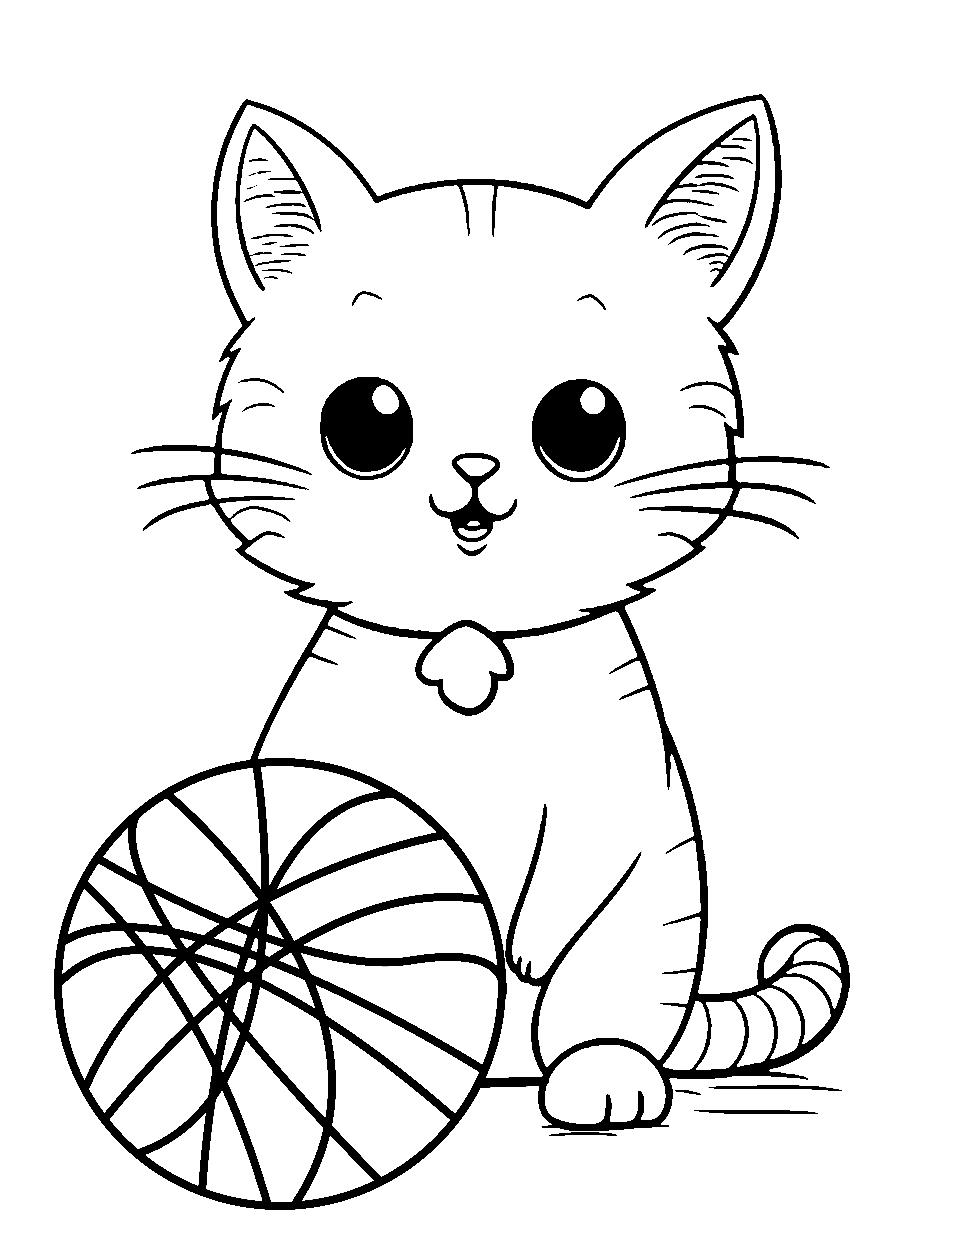 Preschool coloring pages free printable sheets